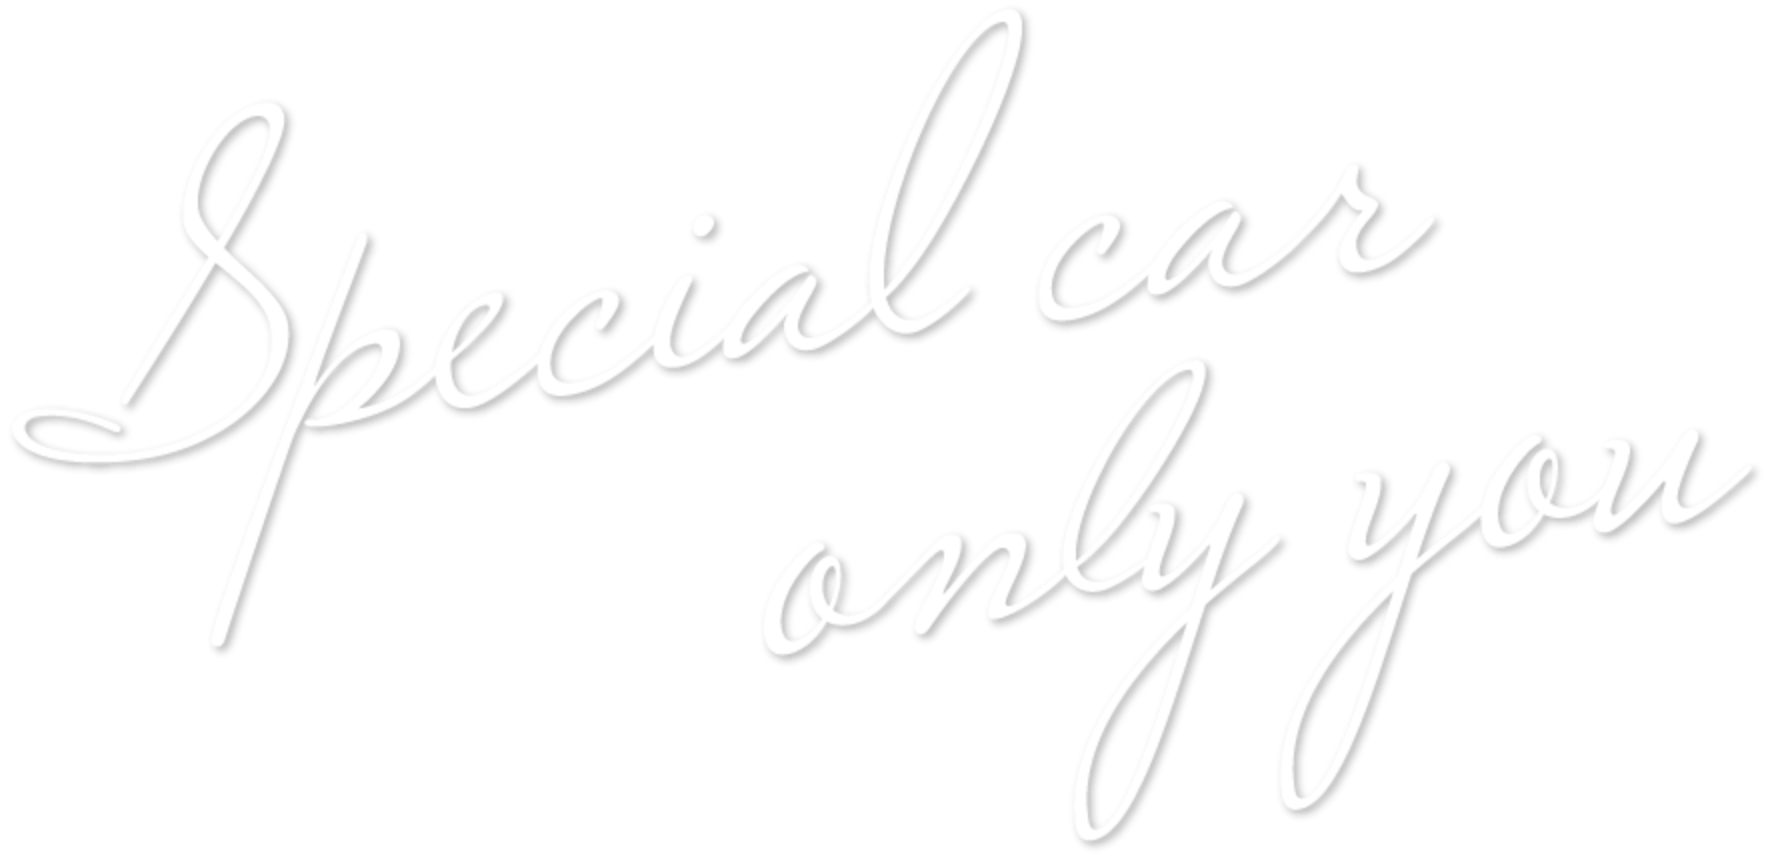 Special car only you